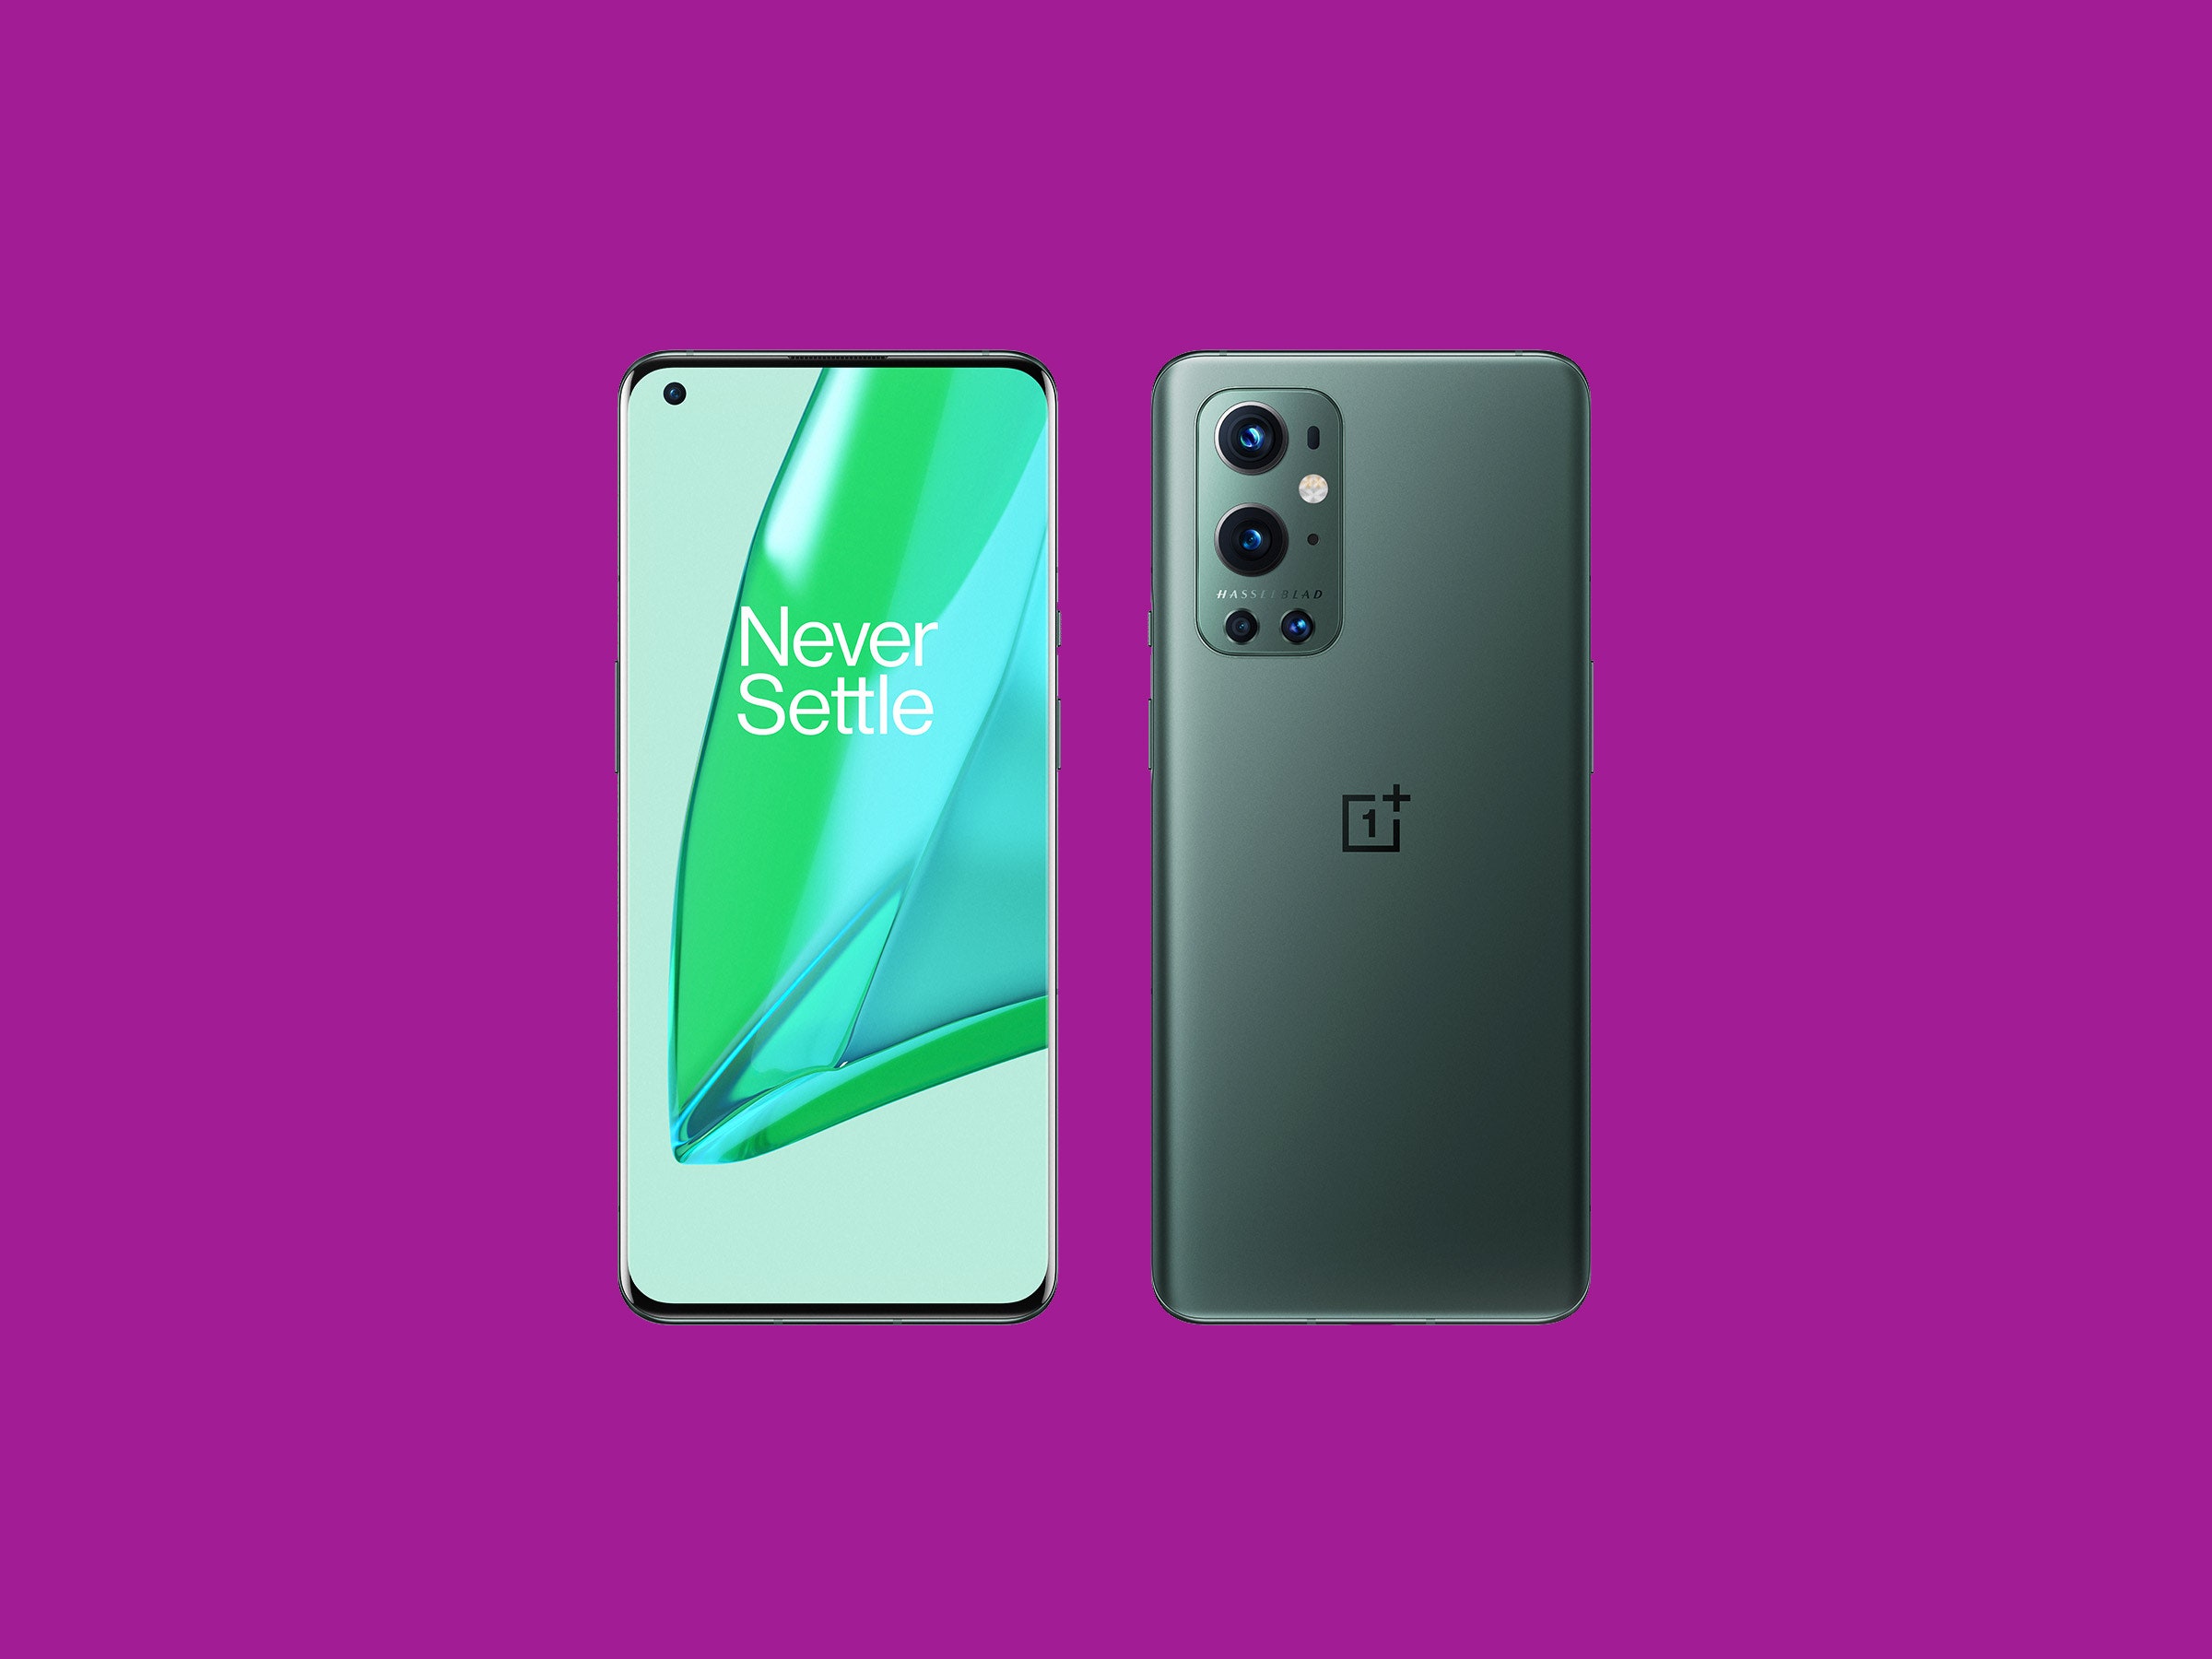 OnePlus deliberately slows down OnePlus 9 and OnePlus 9 Pro in Chrome, Twitter, Facebook and other apps